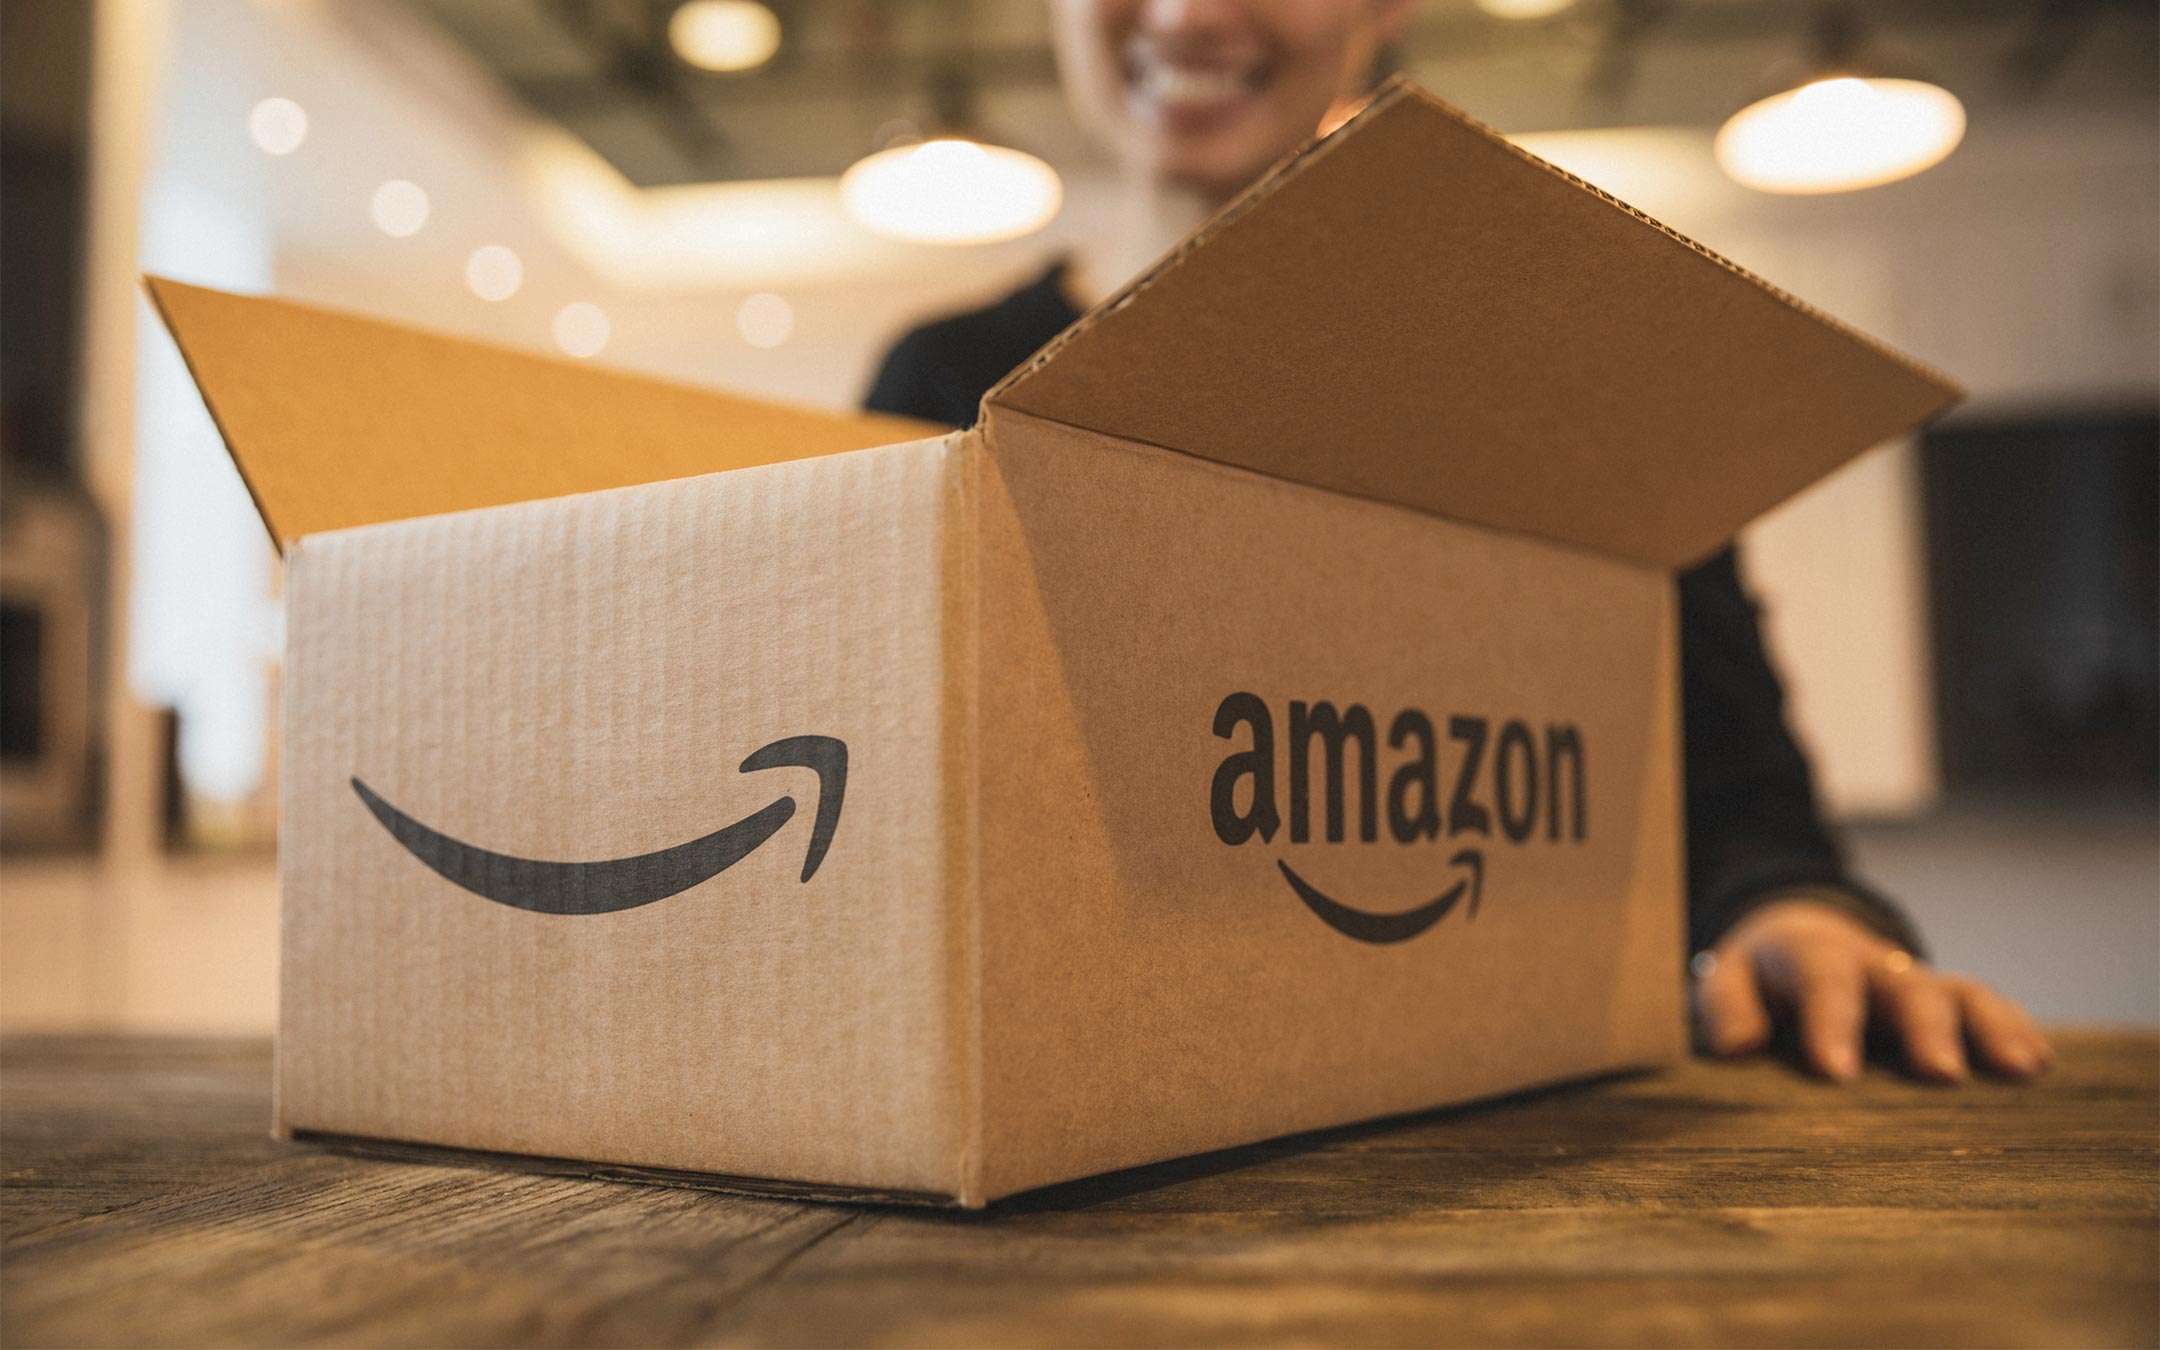 How Amazon's No Hurry Delivery Works